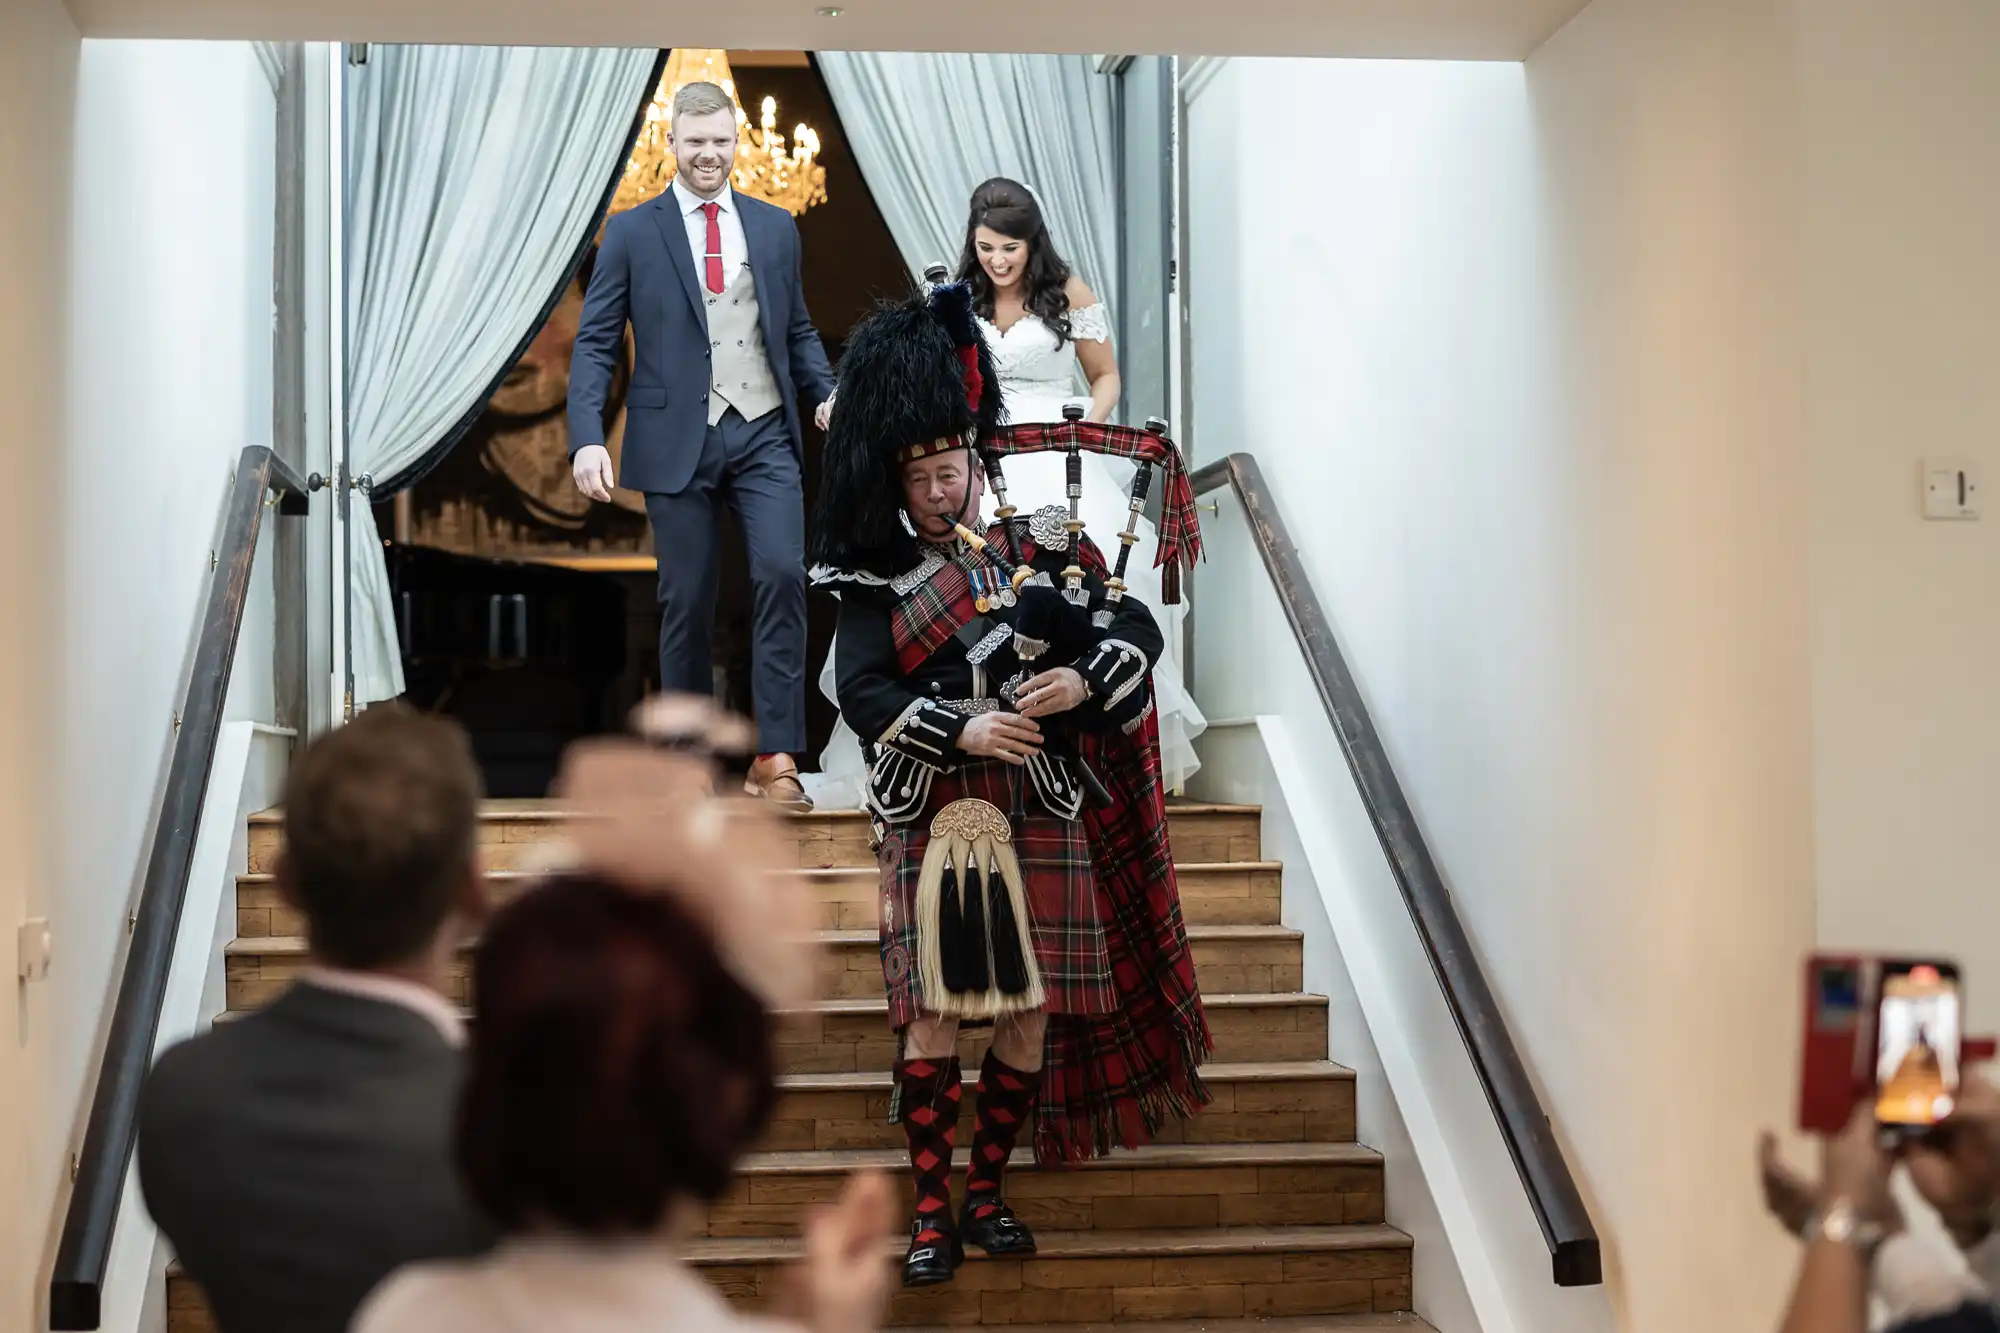 A man and woman descend stairs behind a bagpiper at an event while people admire and take photos.